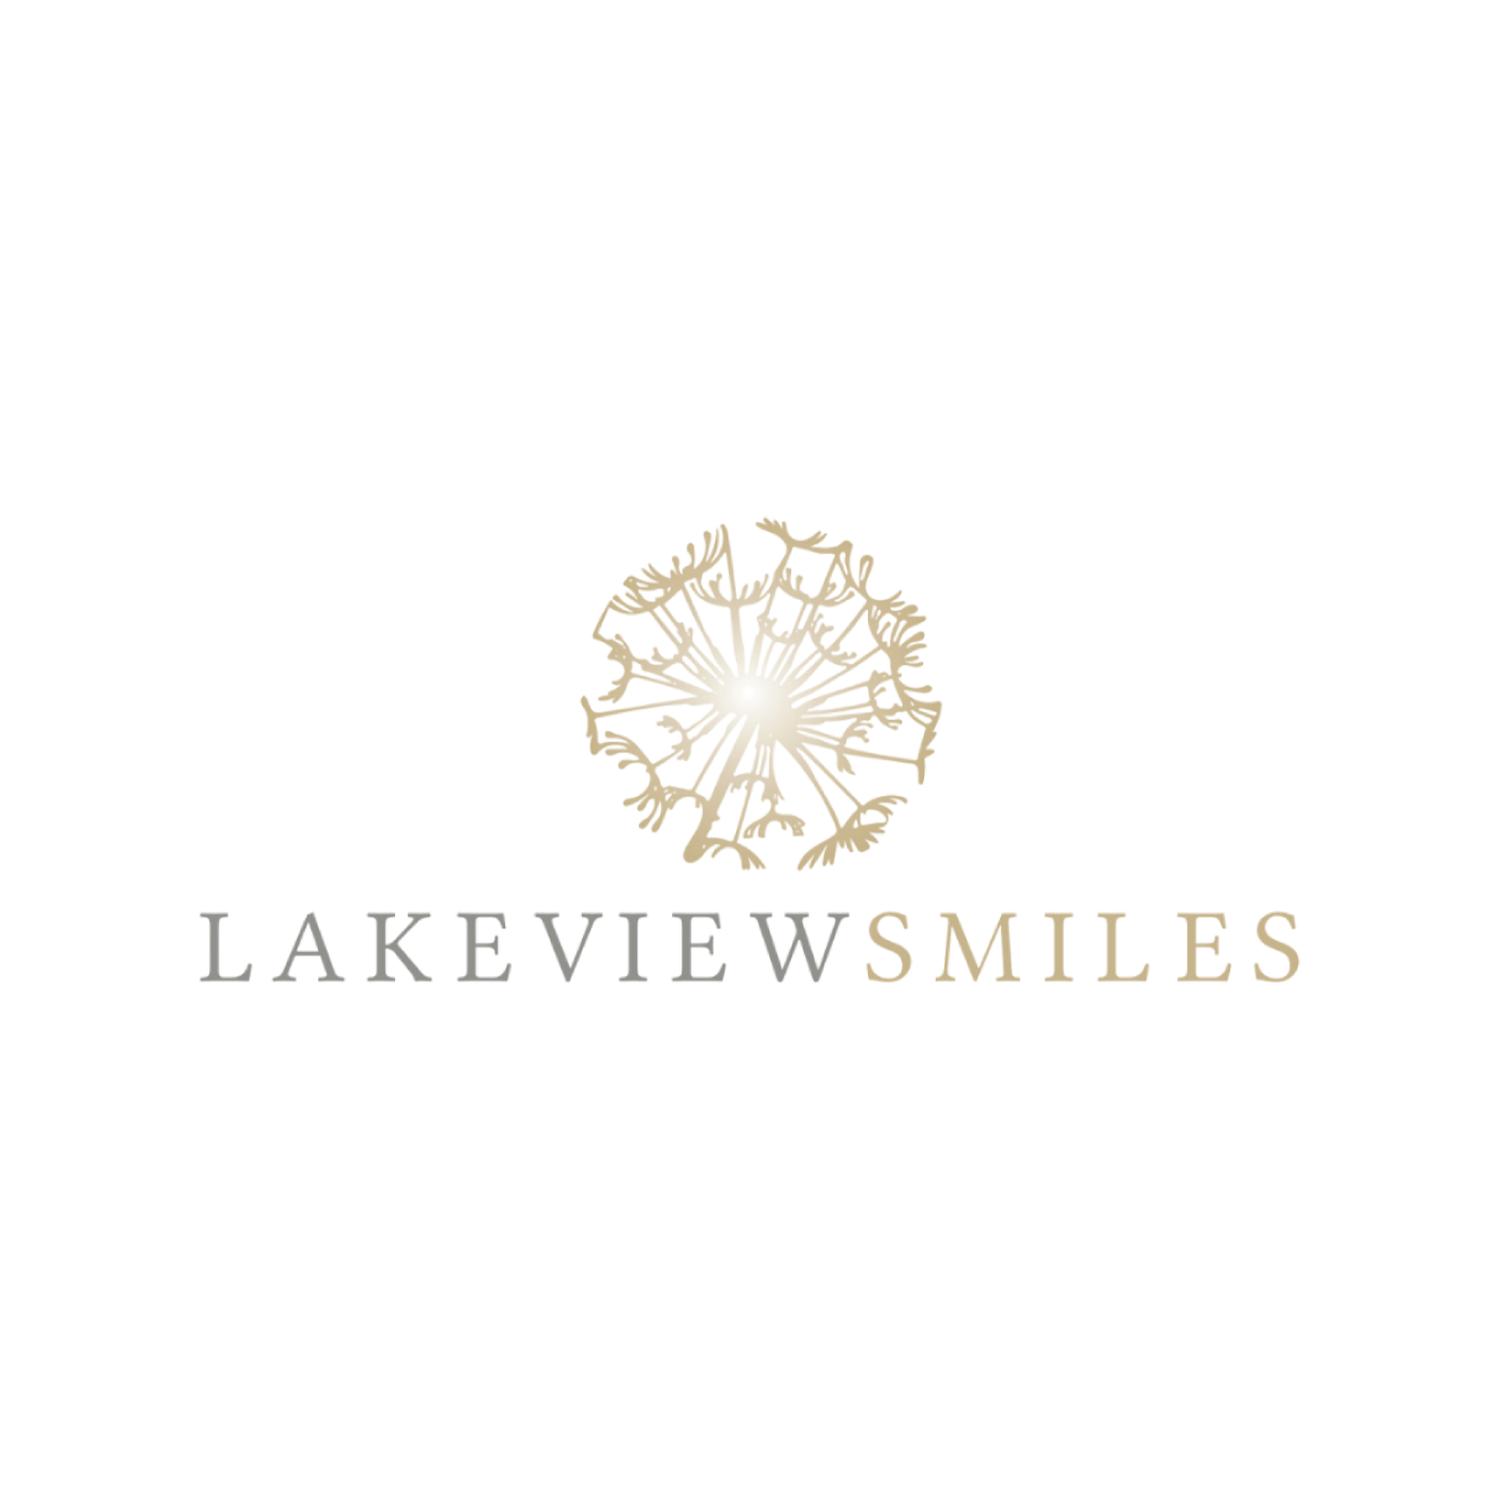 Lakeview Smiles - Edgewater - Chicago, IL 60660 - (312)854-7668 | ShowMeLocal.com